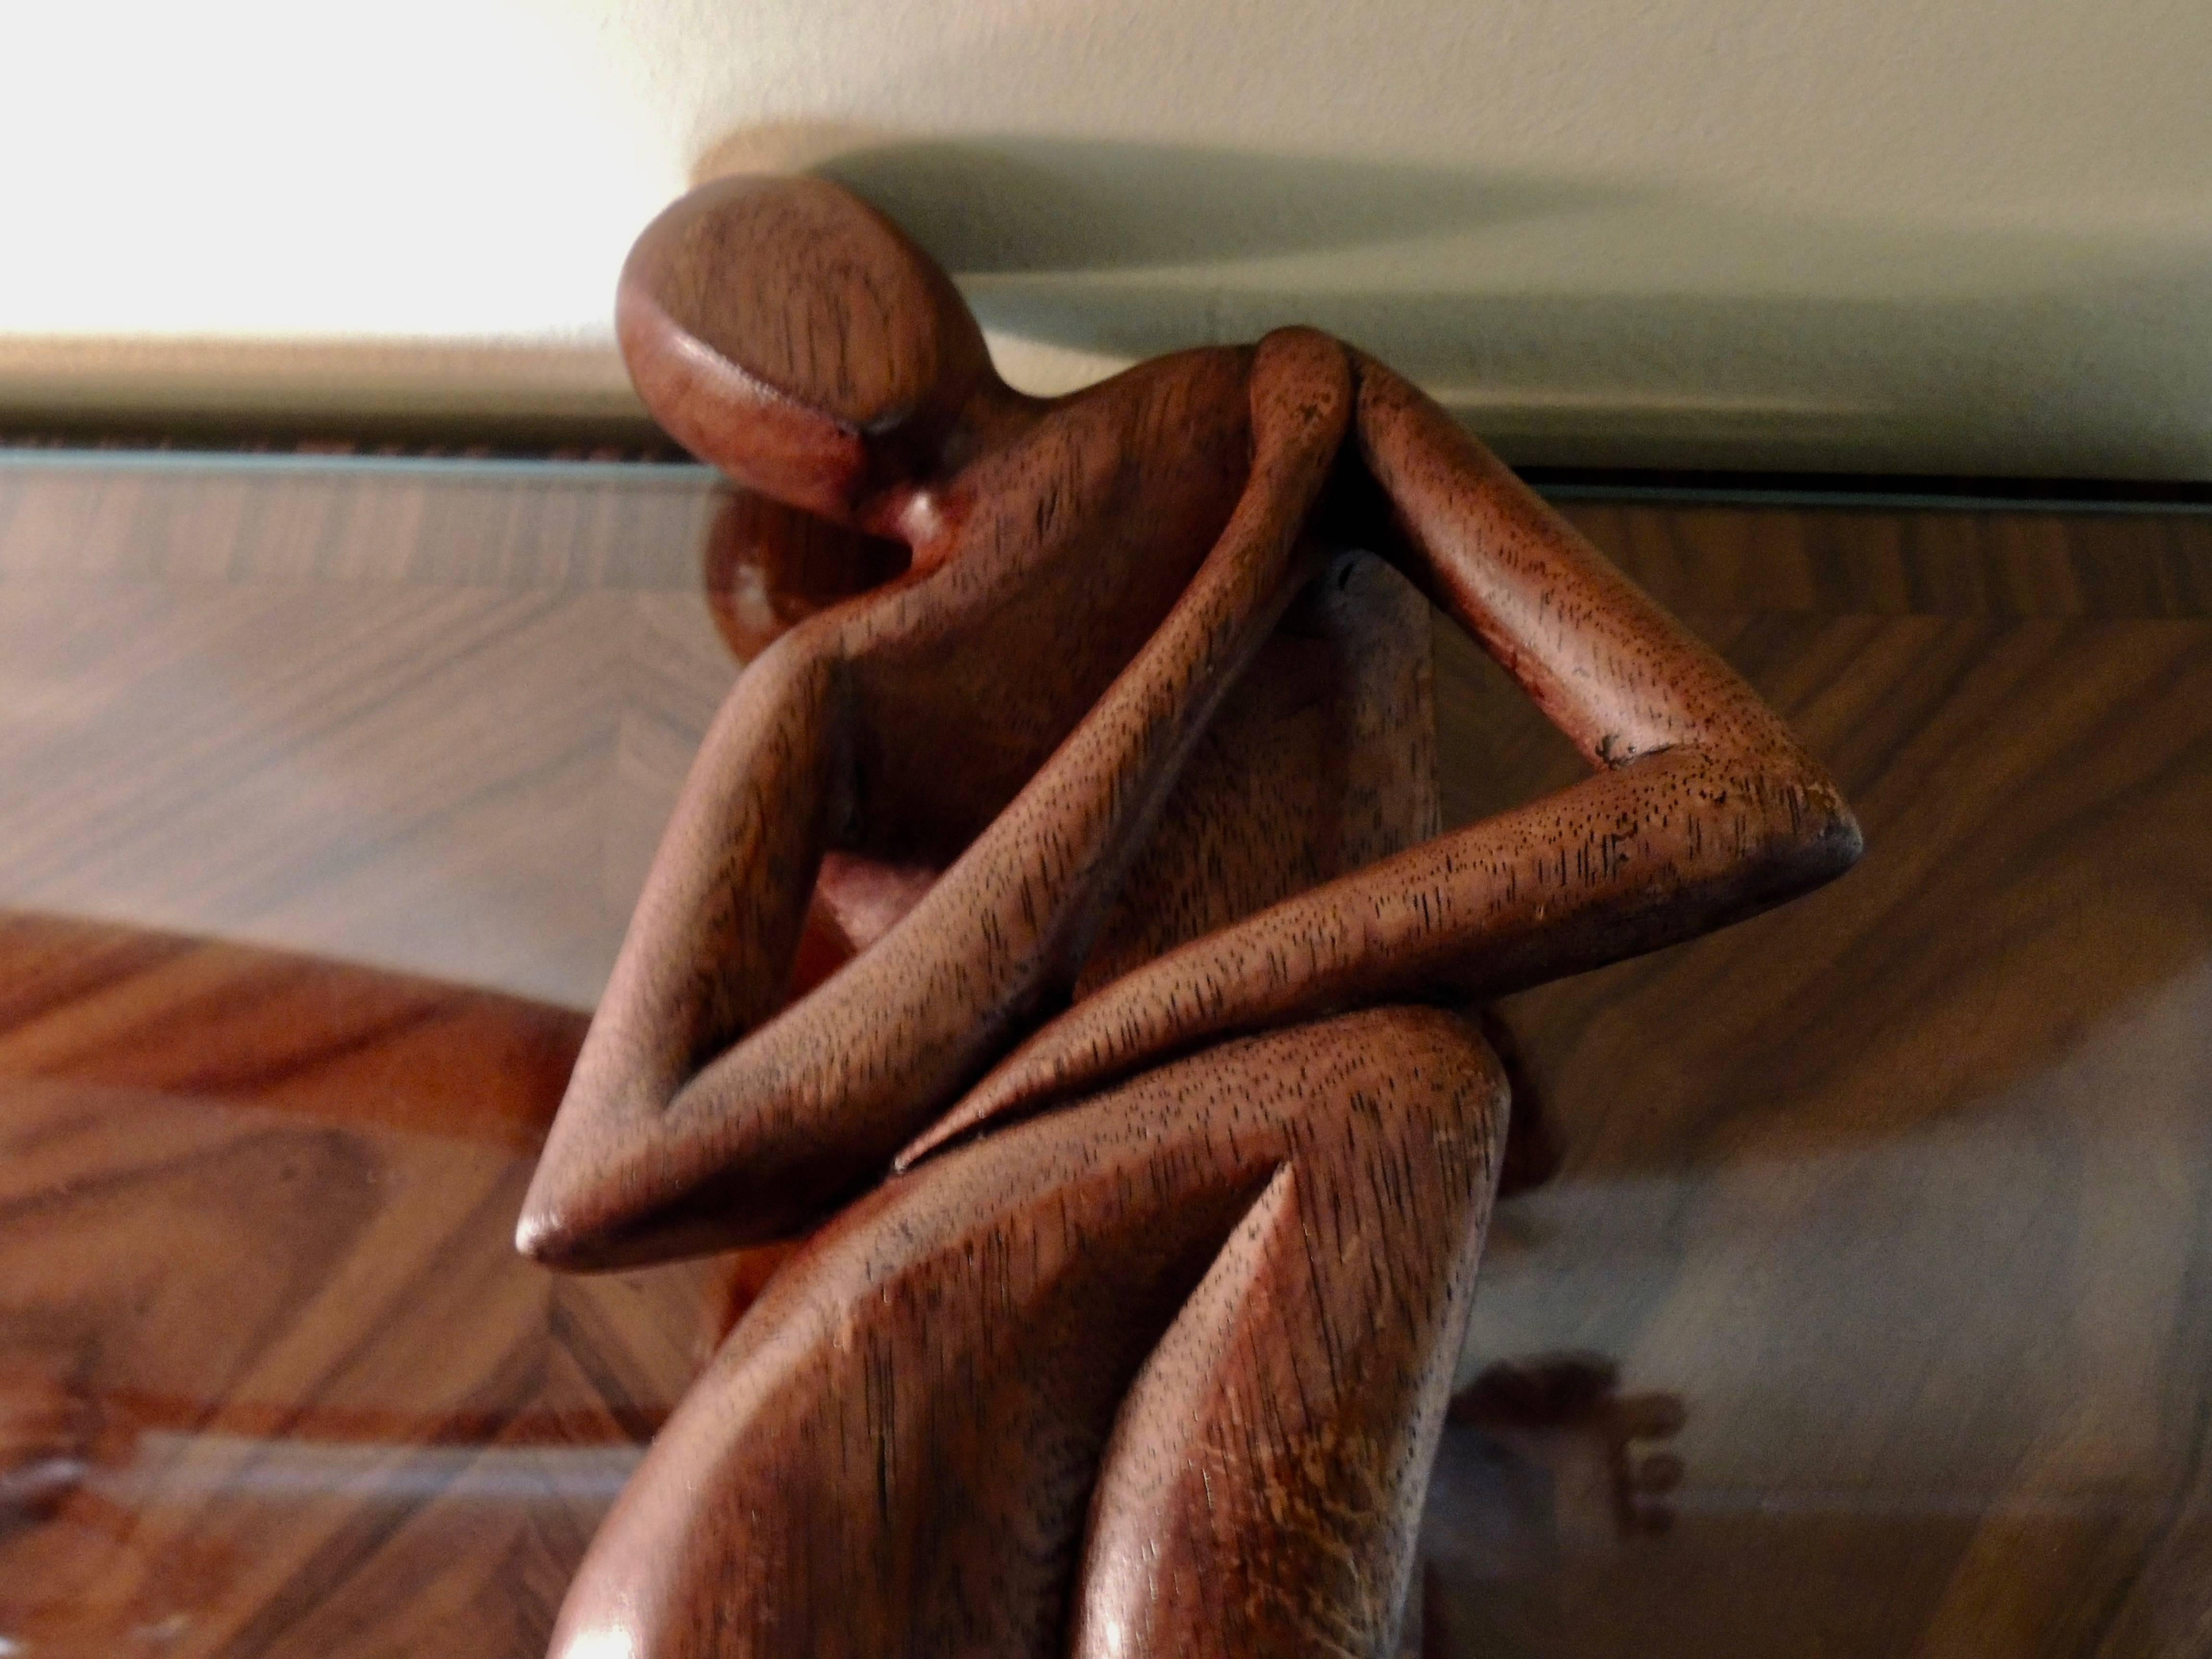 This Art Deco seated figure by Franz Hagenauer is one of the most graceful designs to have come from the “Werkstatte Hagenauer of Wien”. Carved of oak, stained a rich reddish brown tone and mounted on a chrome base this piece is more elegant than